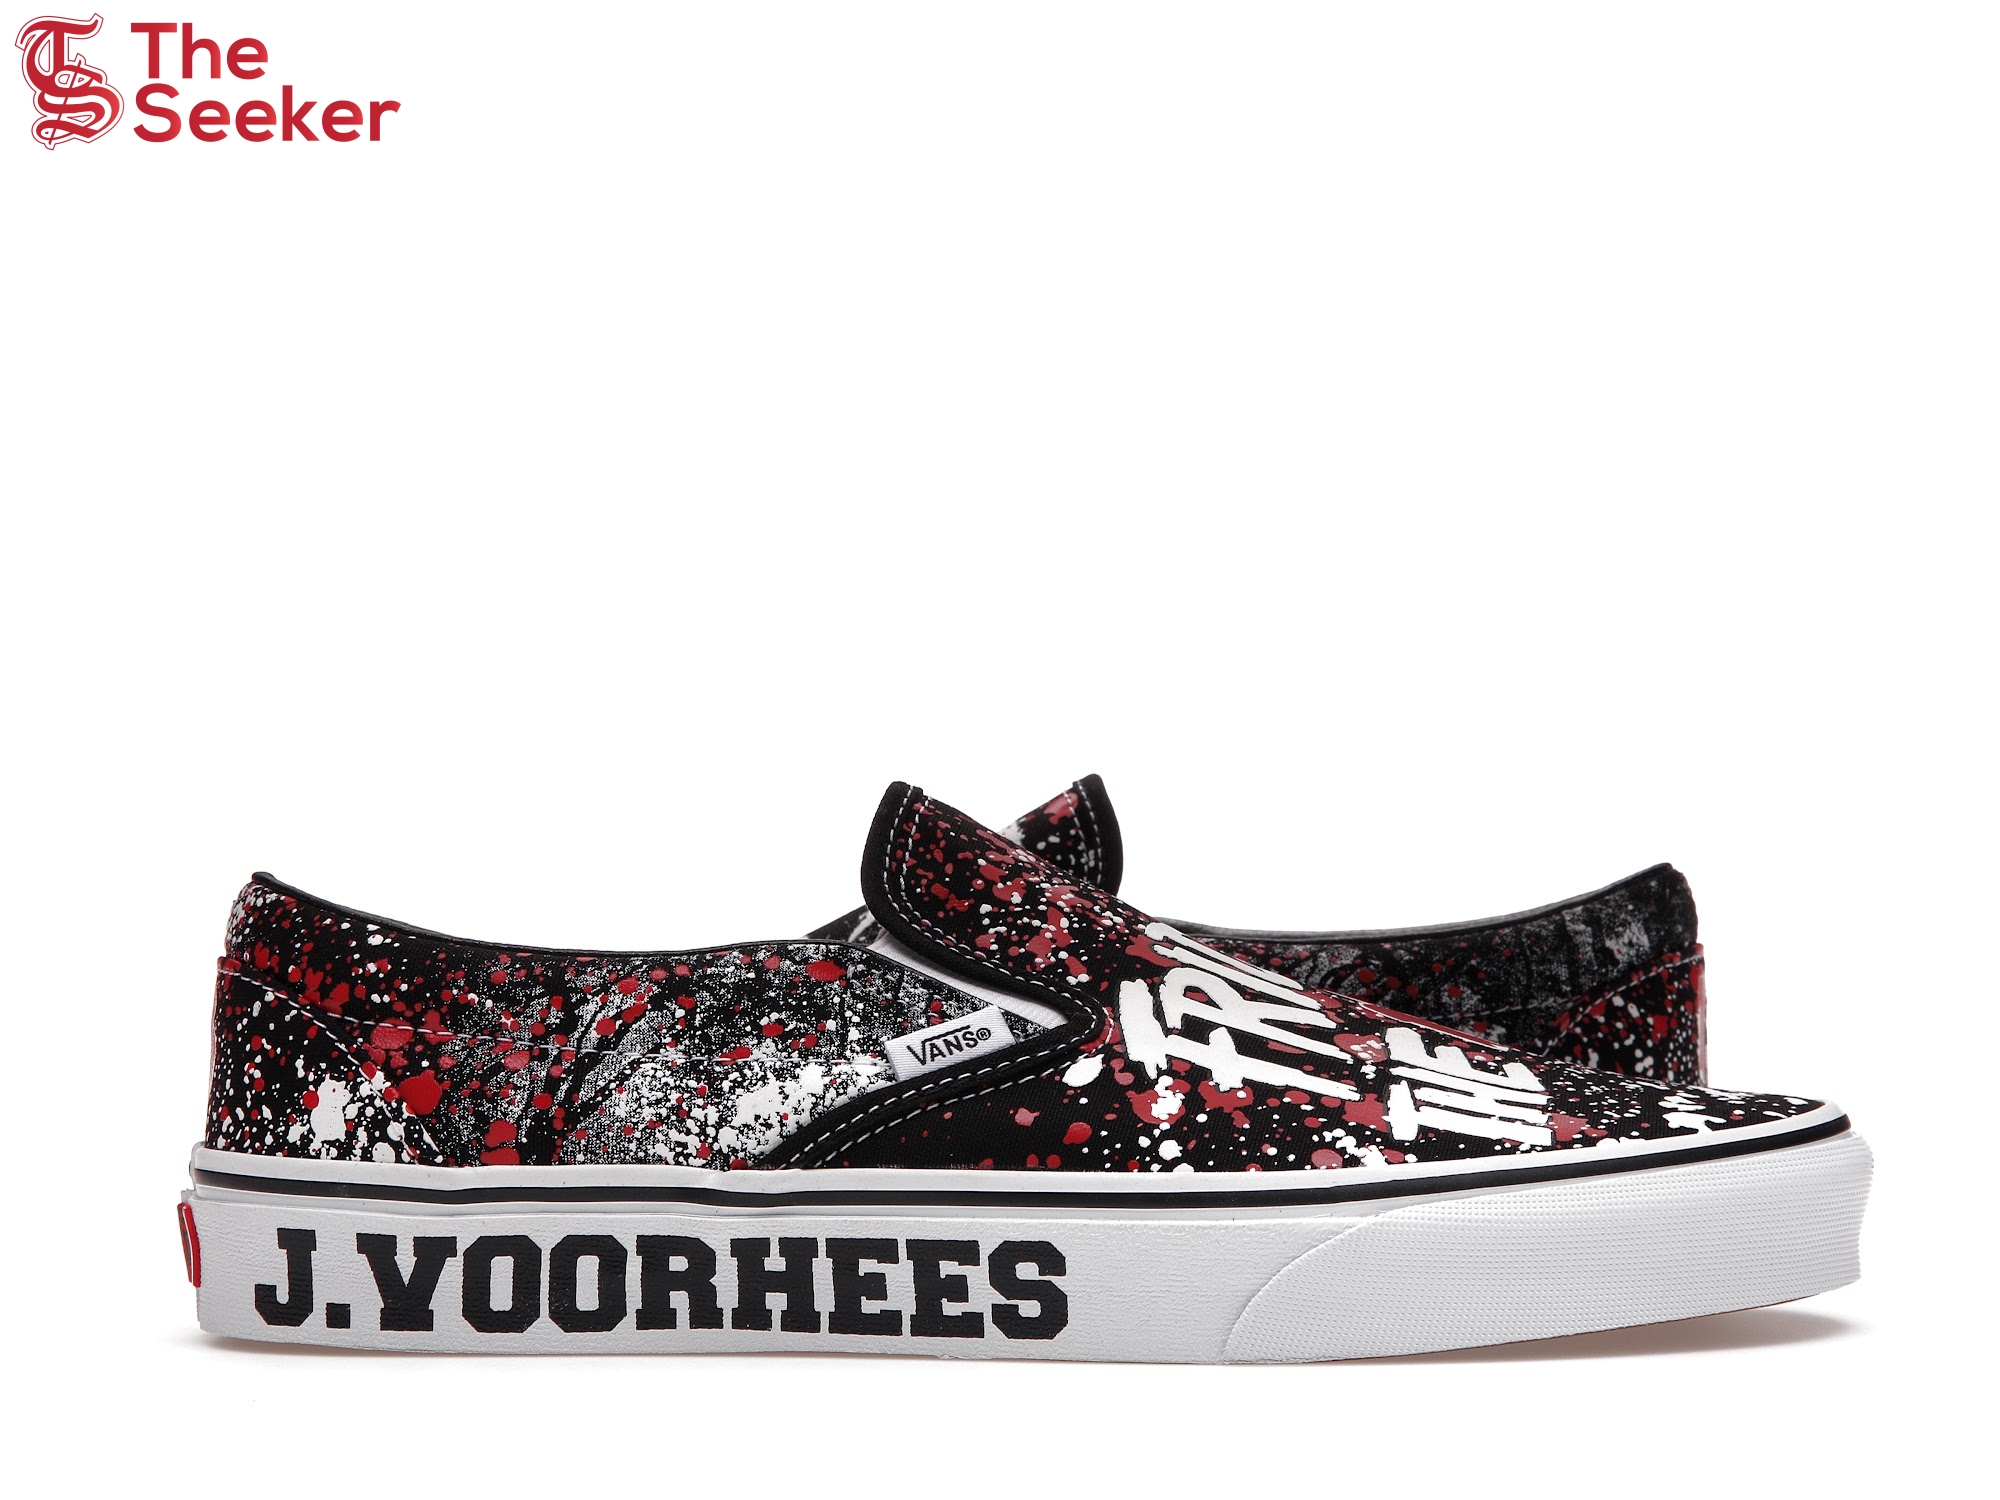 Vans Classic Slip-On Horror Pack Friday the 13th Jason Voorhees